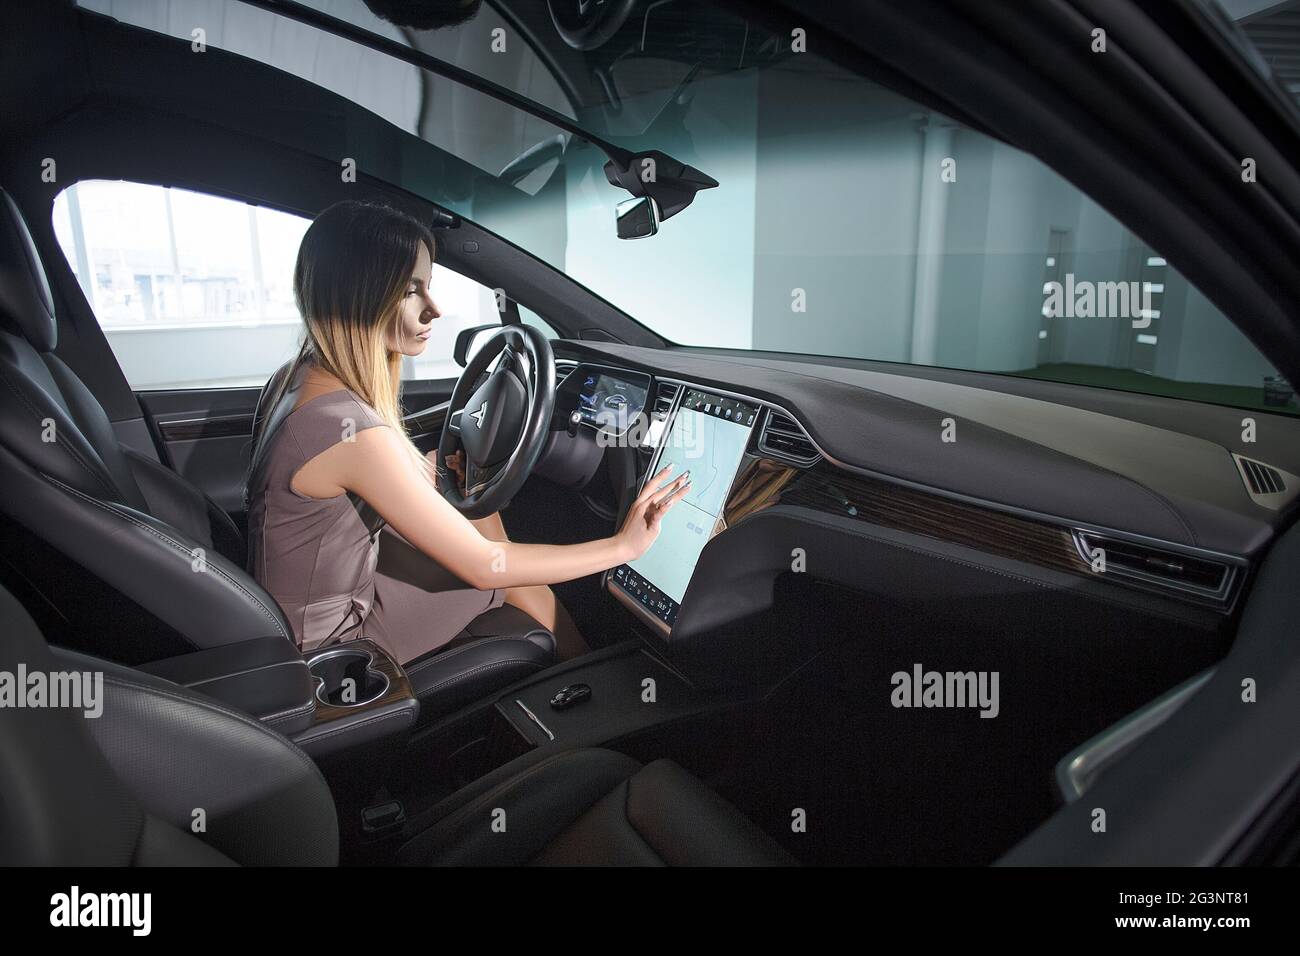 Inside View of Luxury Last Technology Electric Vehicle Stock Photo